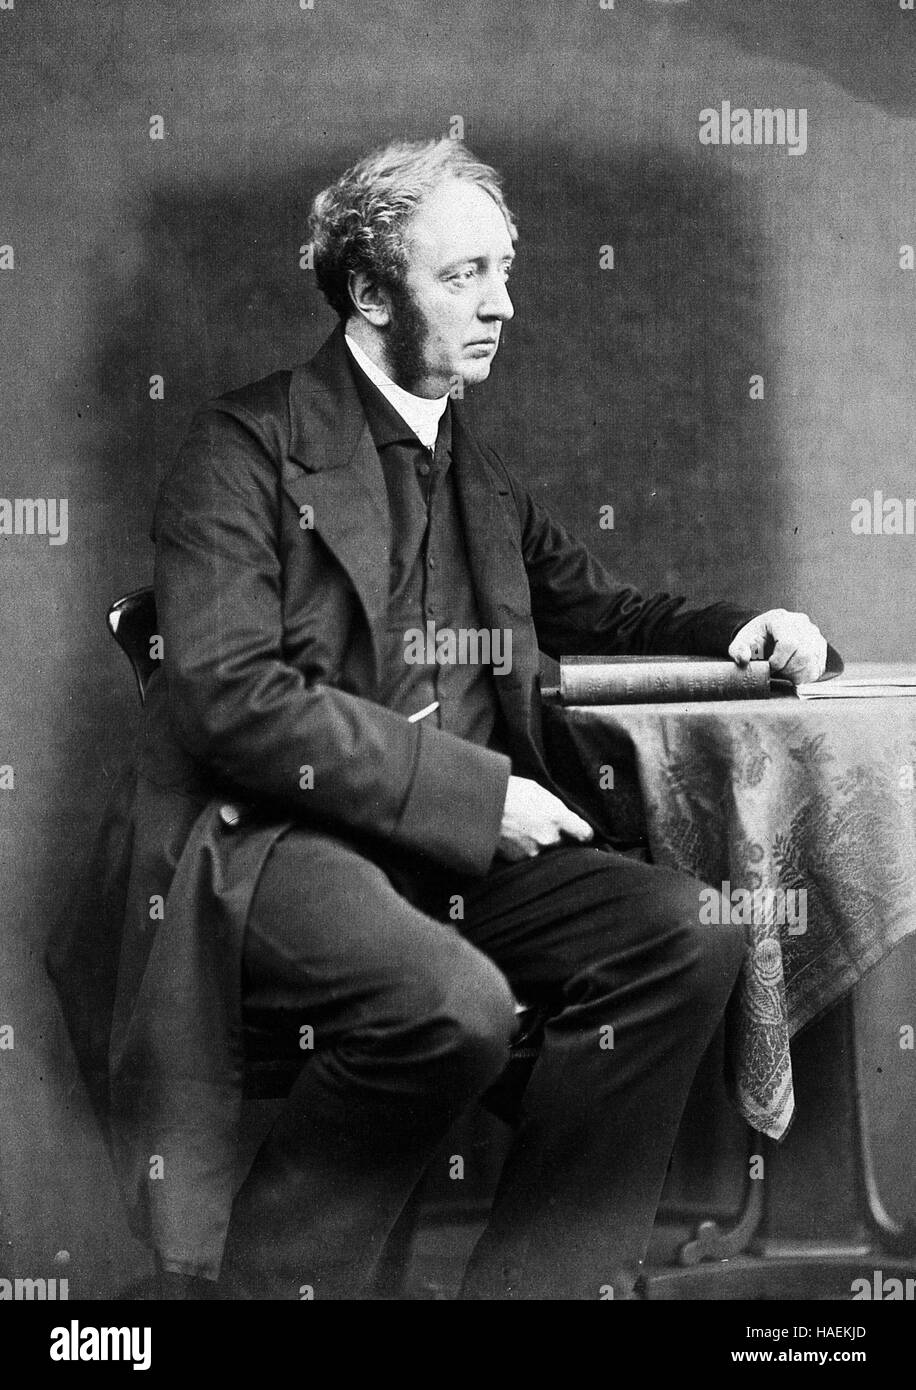 HUGH WELCH DIAMOND (1809-1886) English psychiatrist and photographer in 1856   1856 Iconographic Photographic Society Club album Published: 1856  Copyrighted work available under Creative Commons Attribution only licence CC BY 4.0 http://creativecommons.org/licenses/by/4.0/ Stock Photo